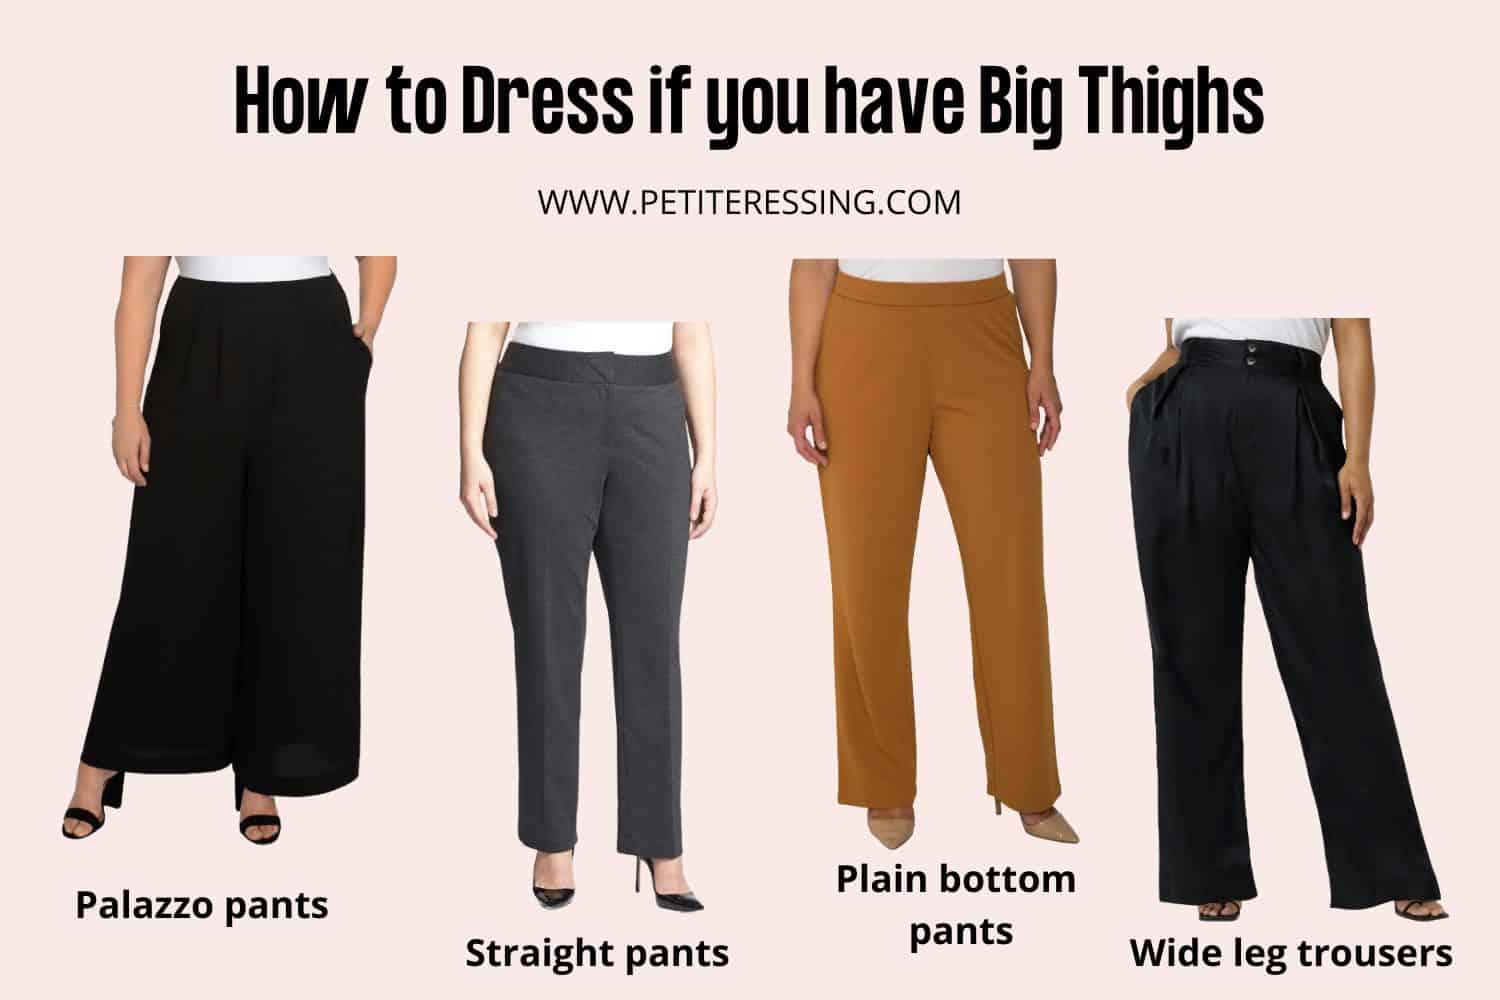 How To Dress For Big Thighs? | vlr.eng.br